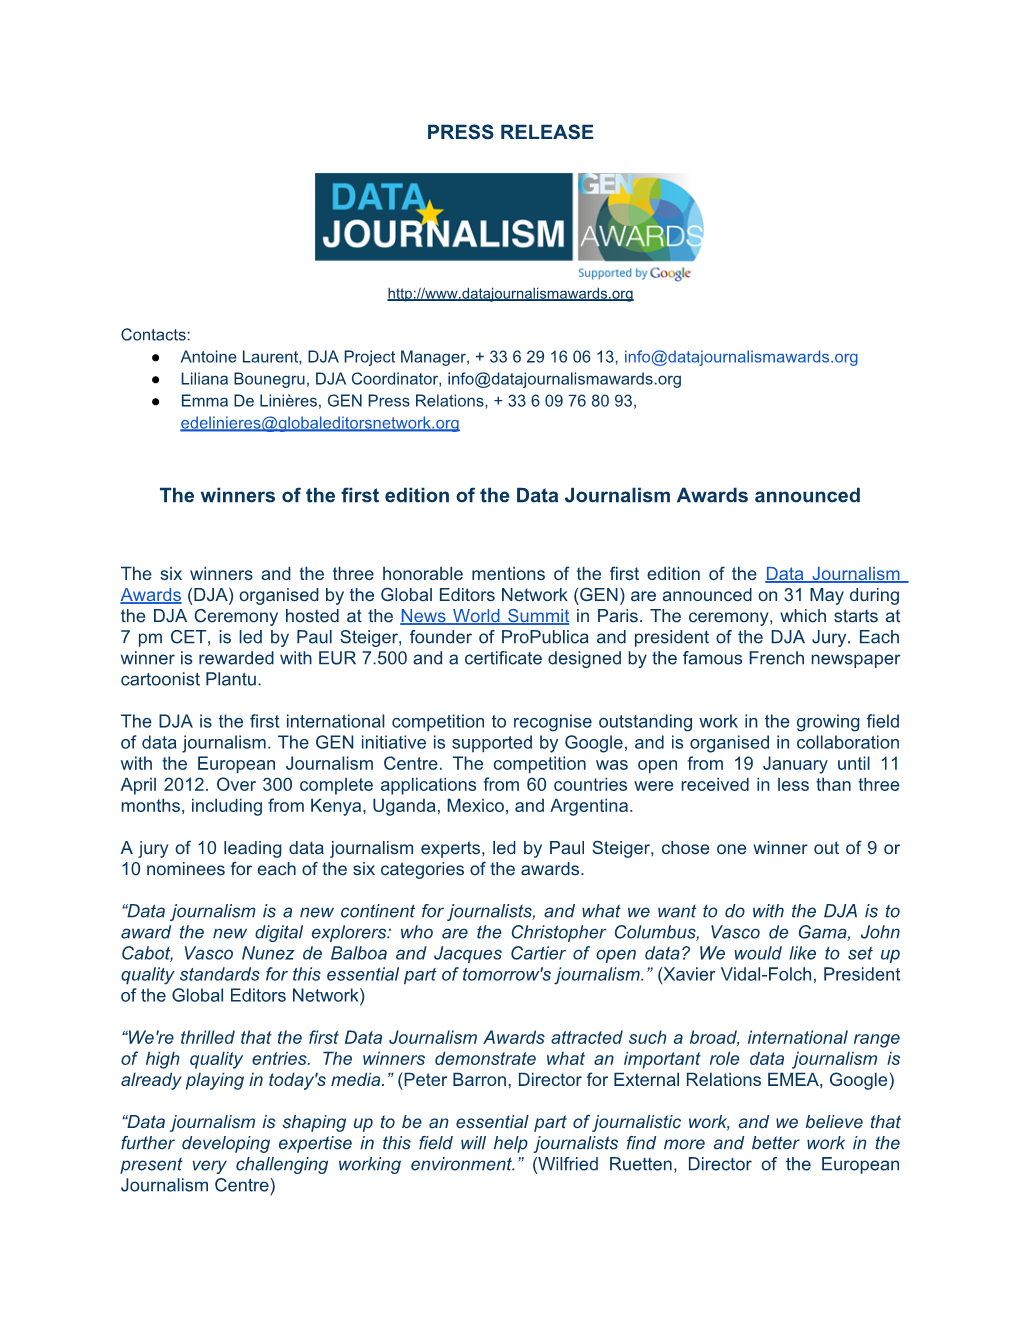 PRESS RELEASE the Winners of the First Edition of the Data